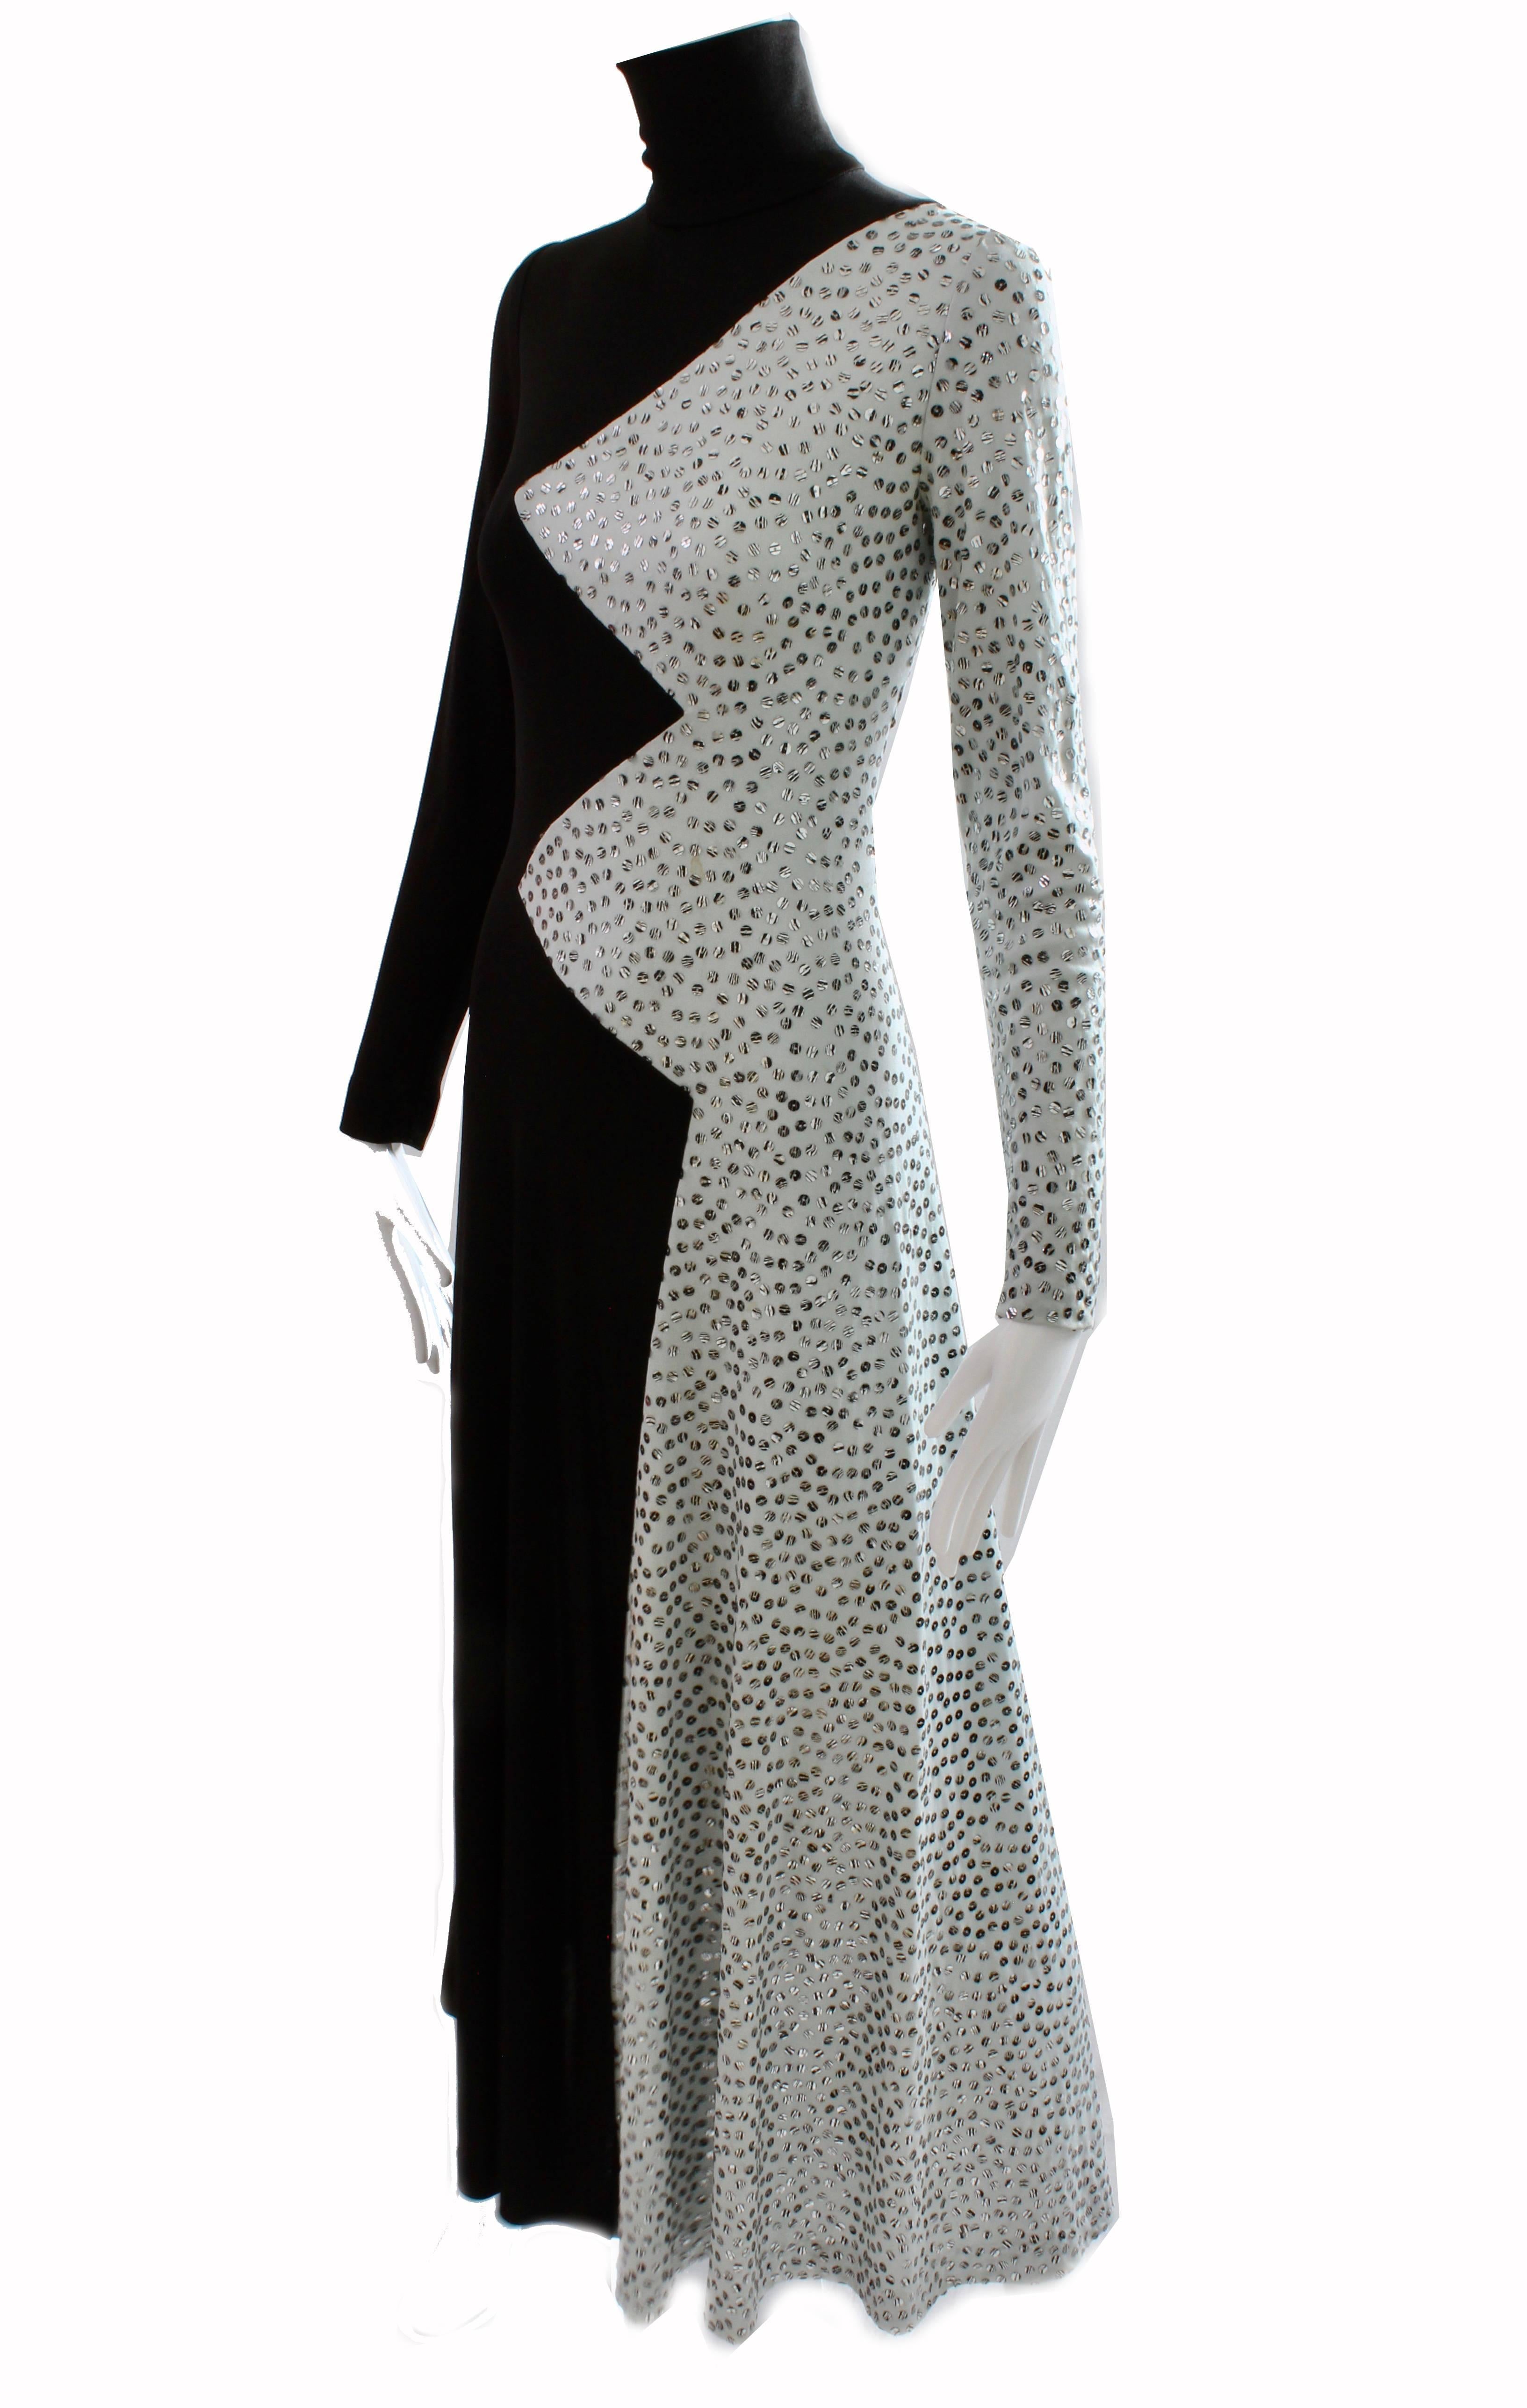 This incredible long dress was made by Boston designer Yolanda Cellucci for her Yolanda's Originals label, most likely in the late 60s or early 70s.  Made from a black and dove gray jersey fabric, it features a zig zag pattern down the front center,